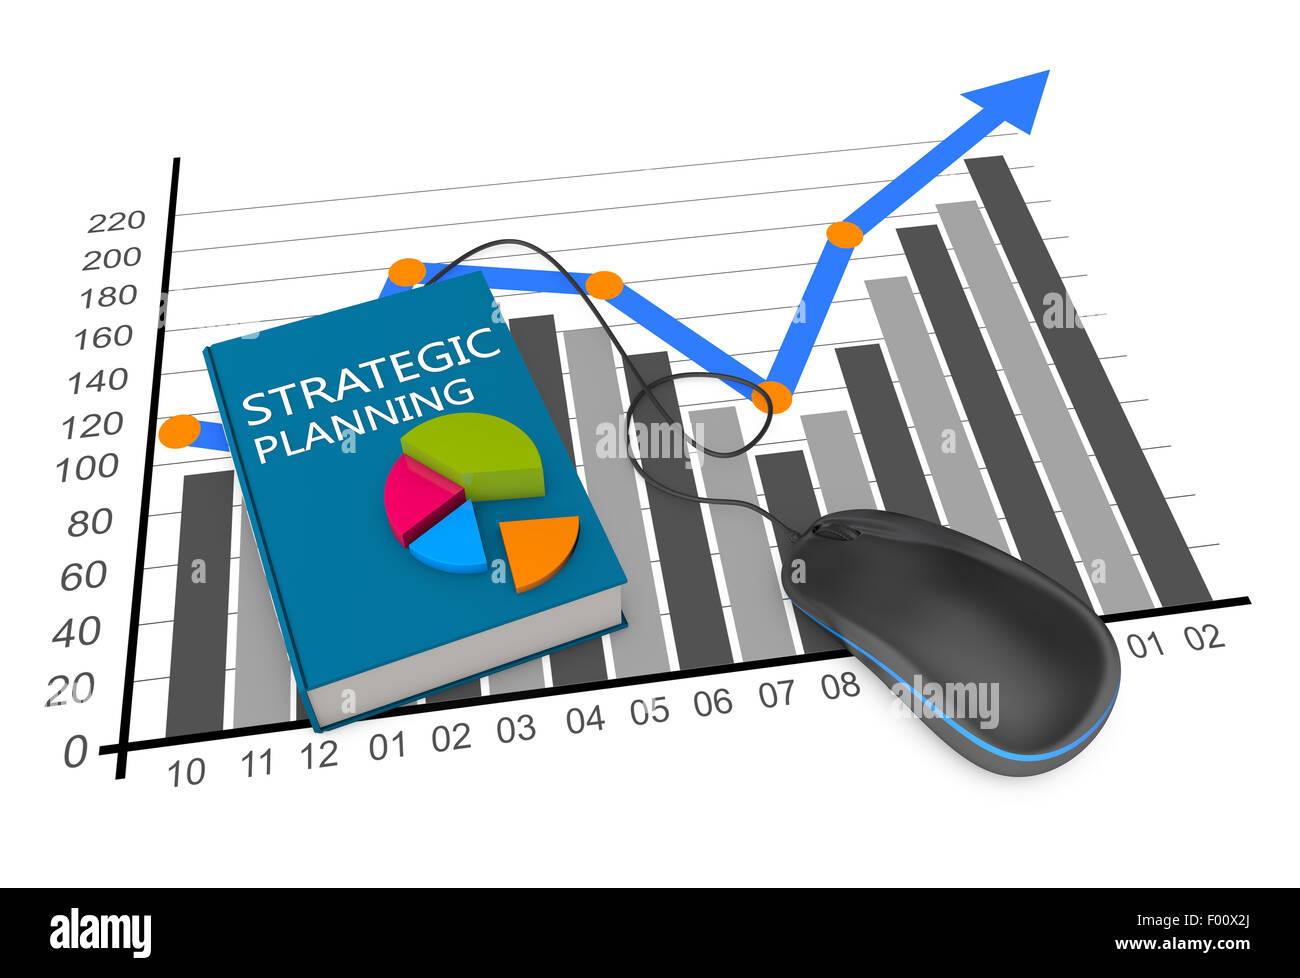 The book on strategic planning Stock Photo